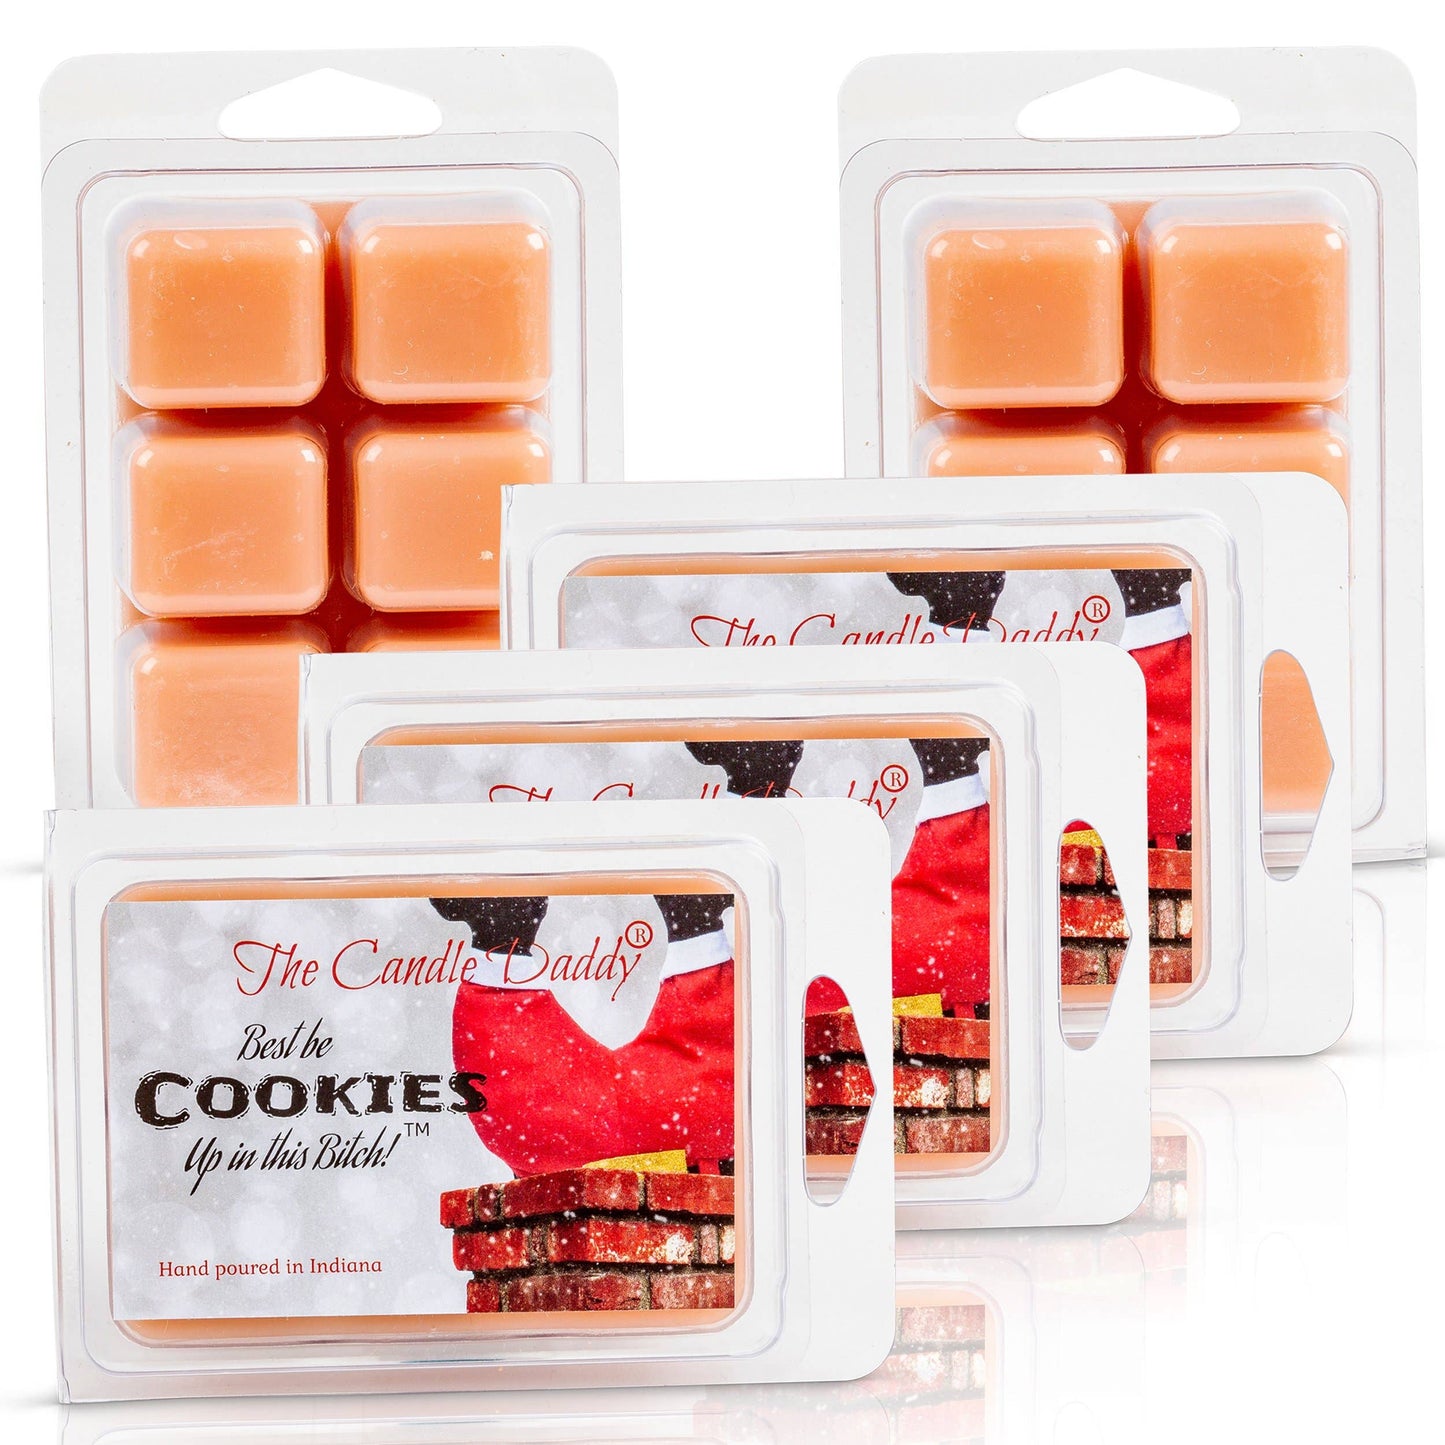 Wax Melts: Best Be Cookies Up in This Bitch - Chocolate Chip (2 oz)